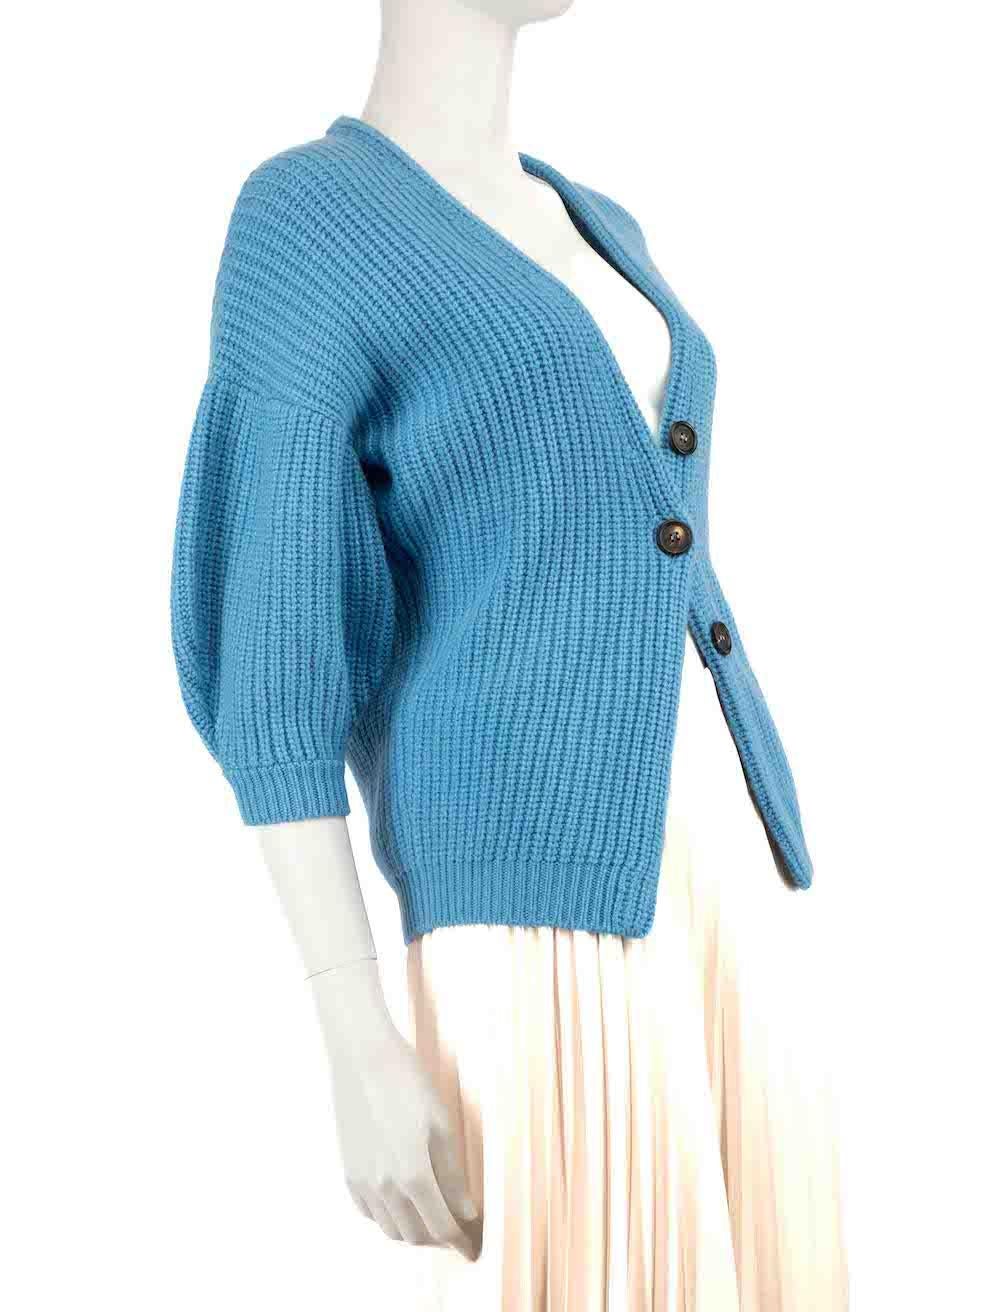 CONDITION is Very good. Hardly any visible wear to cardigan is evident on this used Brunello Cucinelli designer resale item.
 
 
 
 Details
 
 
 Blue
 
 Cashmere
 
 Cardigan
 
 Puff sleeves
 
 Knitted and stretchy
 
 Front button up closure
 
 
 
 
